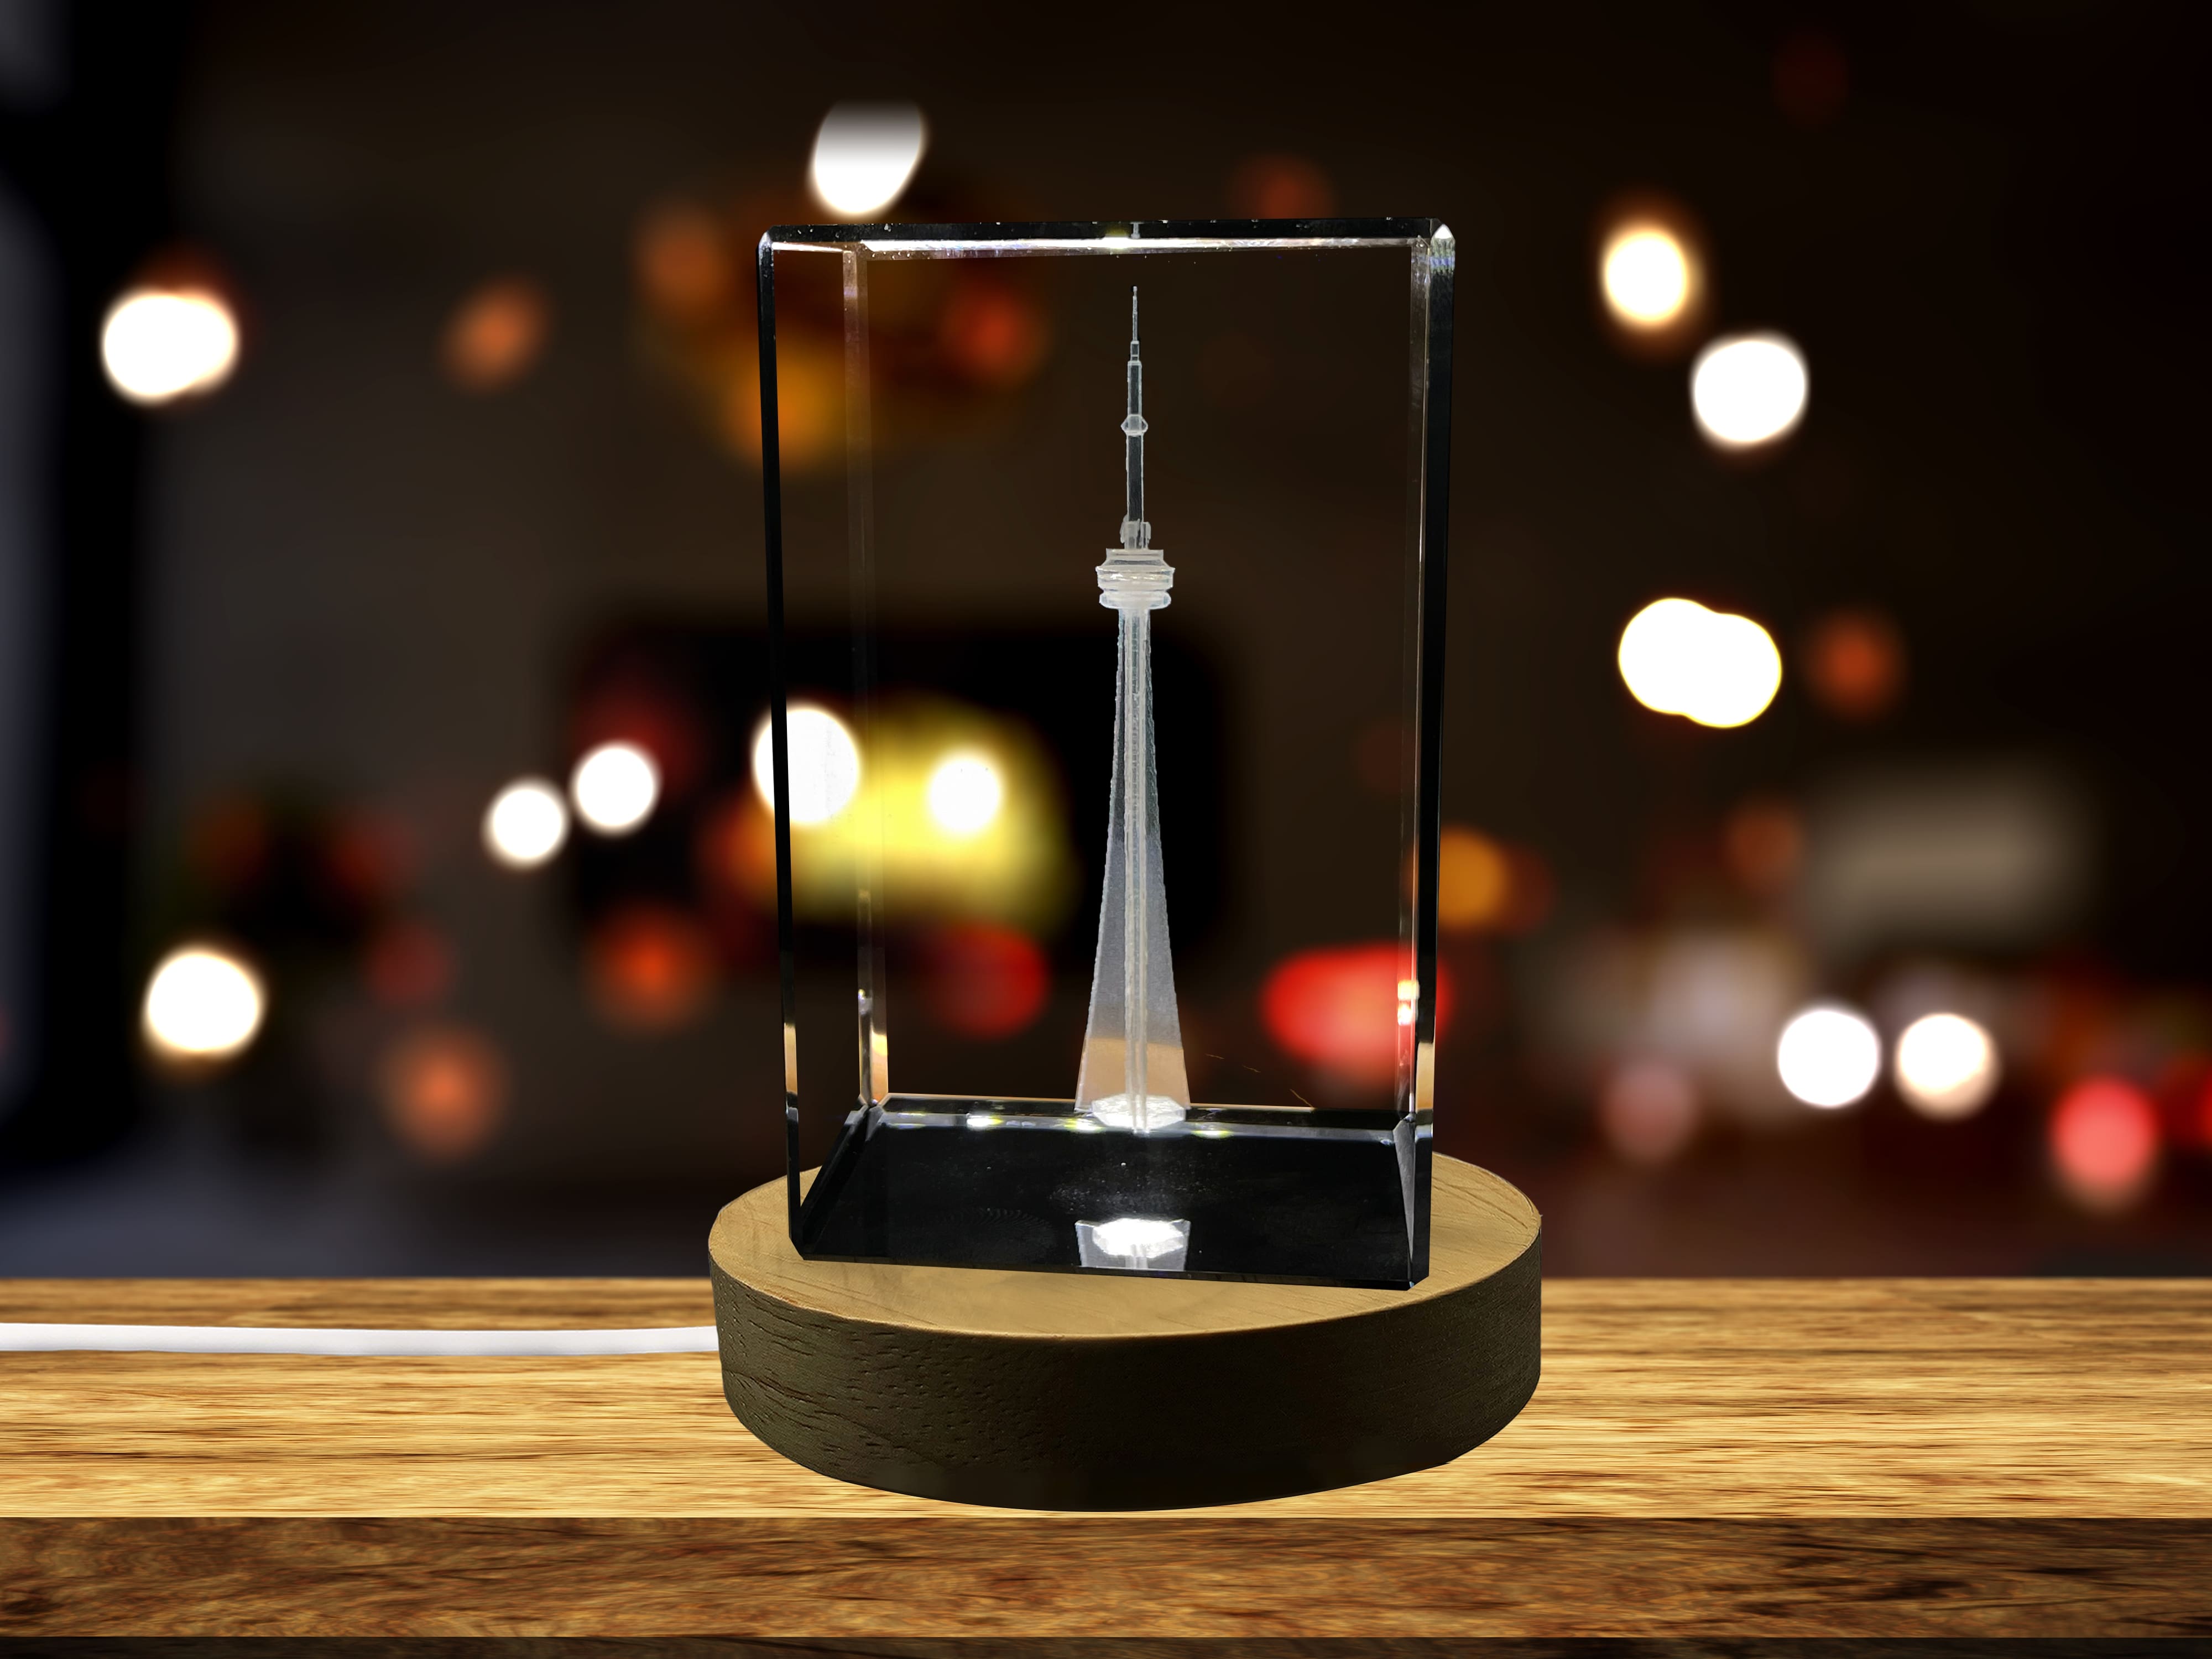 CN Tower 3D Engraved Crystal Collectible Souvenir - Made in Canada - Premium Crystal - Tallest Structure in the Western Hemisphere A&B Crystal Collection